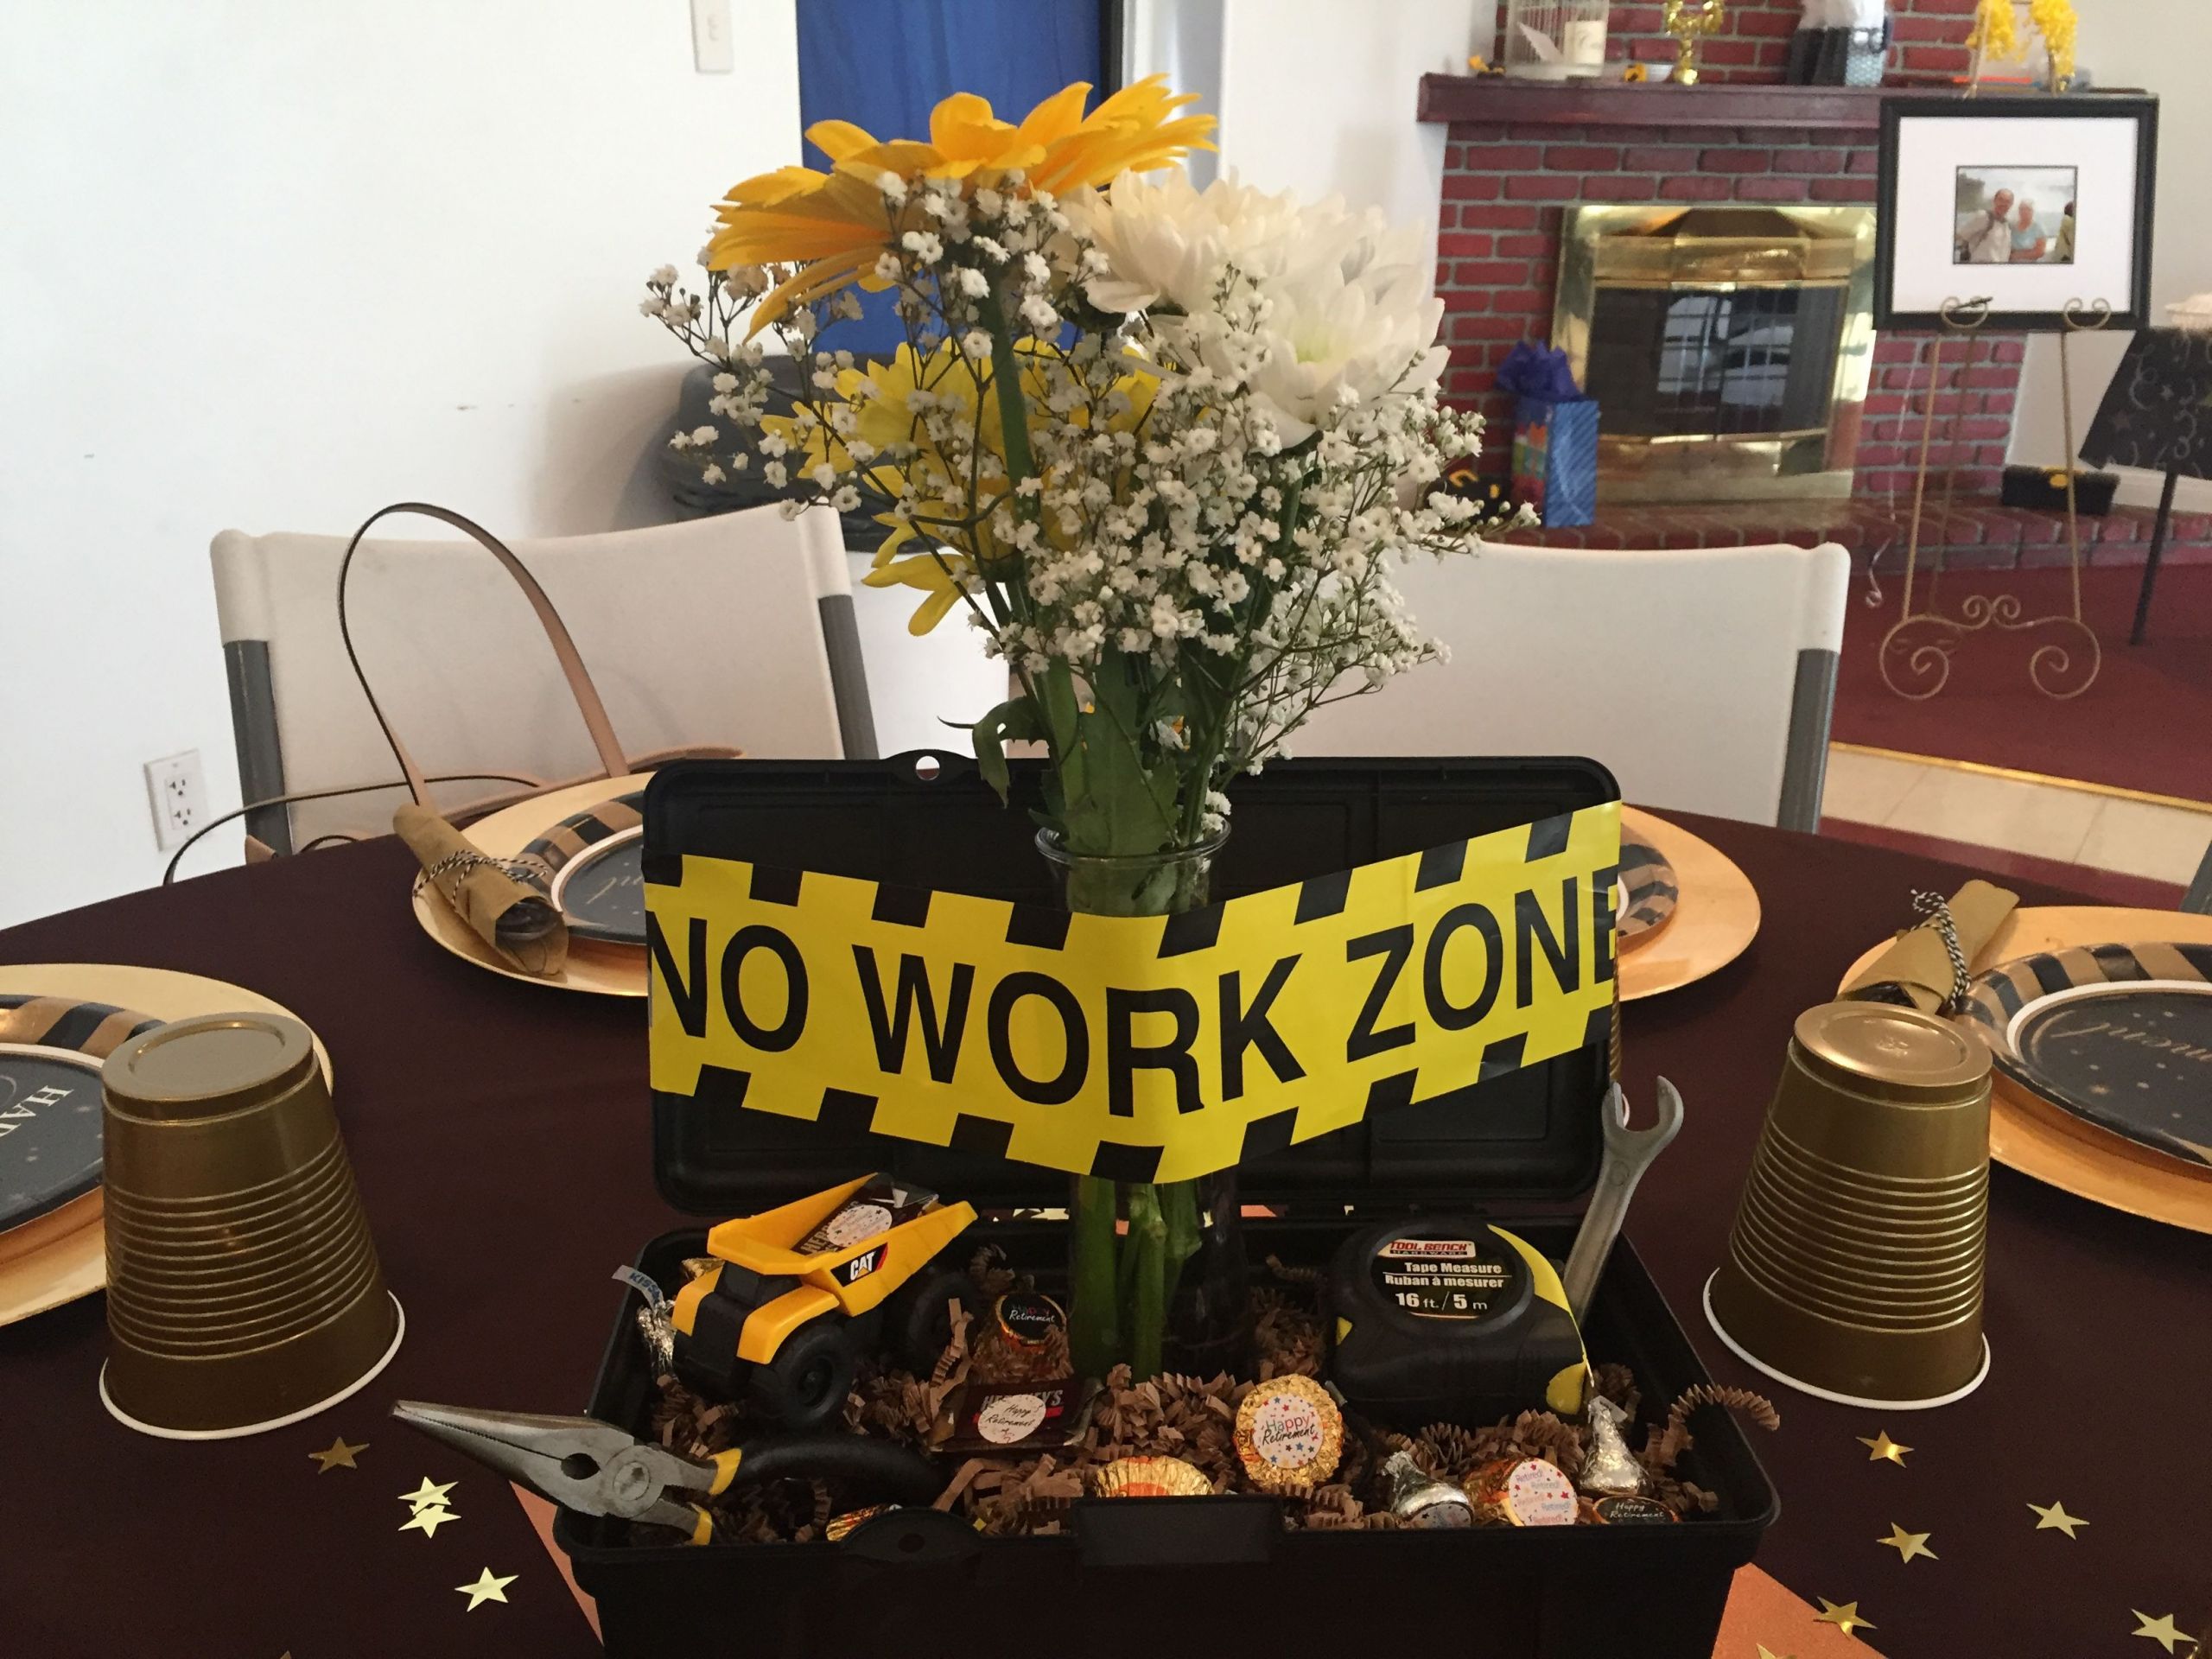 Retirement Party Decorating Ideas
 I couldn t find a retirement party centerpiece for a